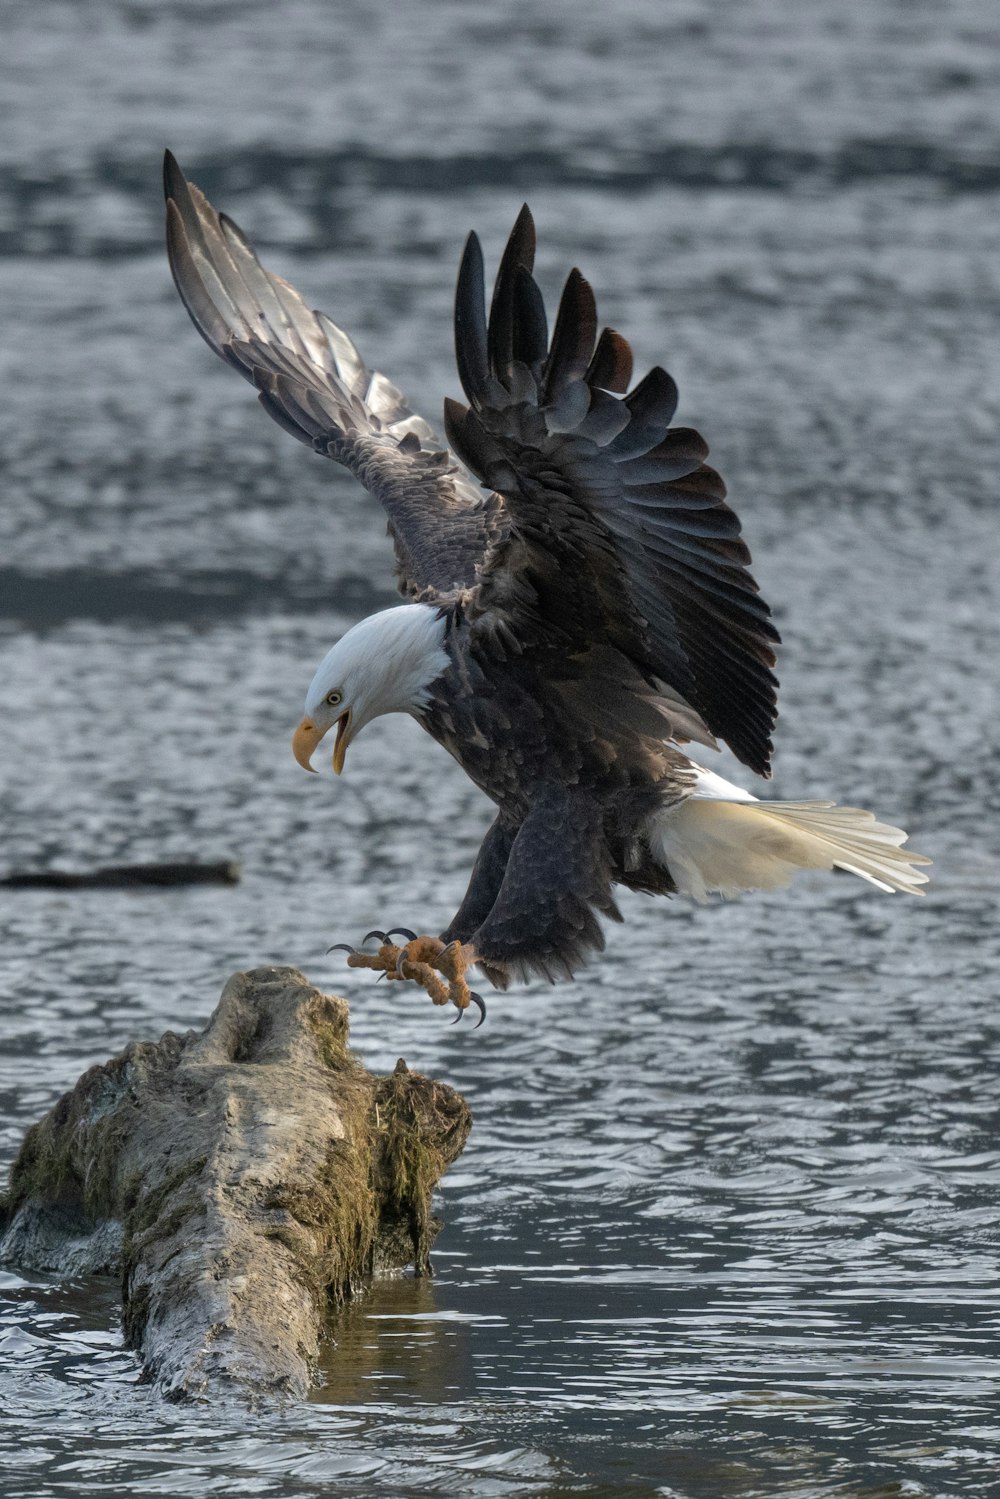 a bald eagle landing on a rock in the water